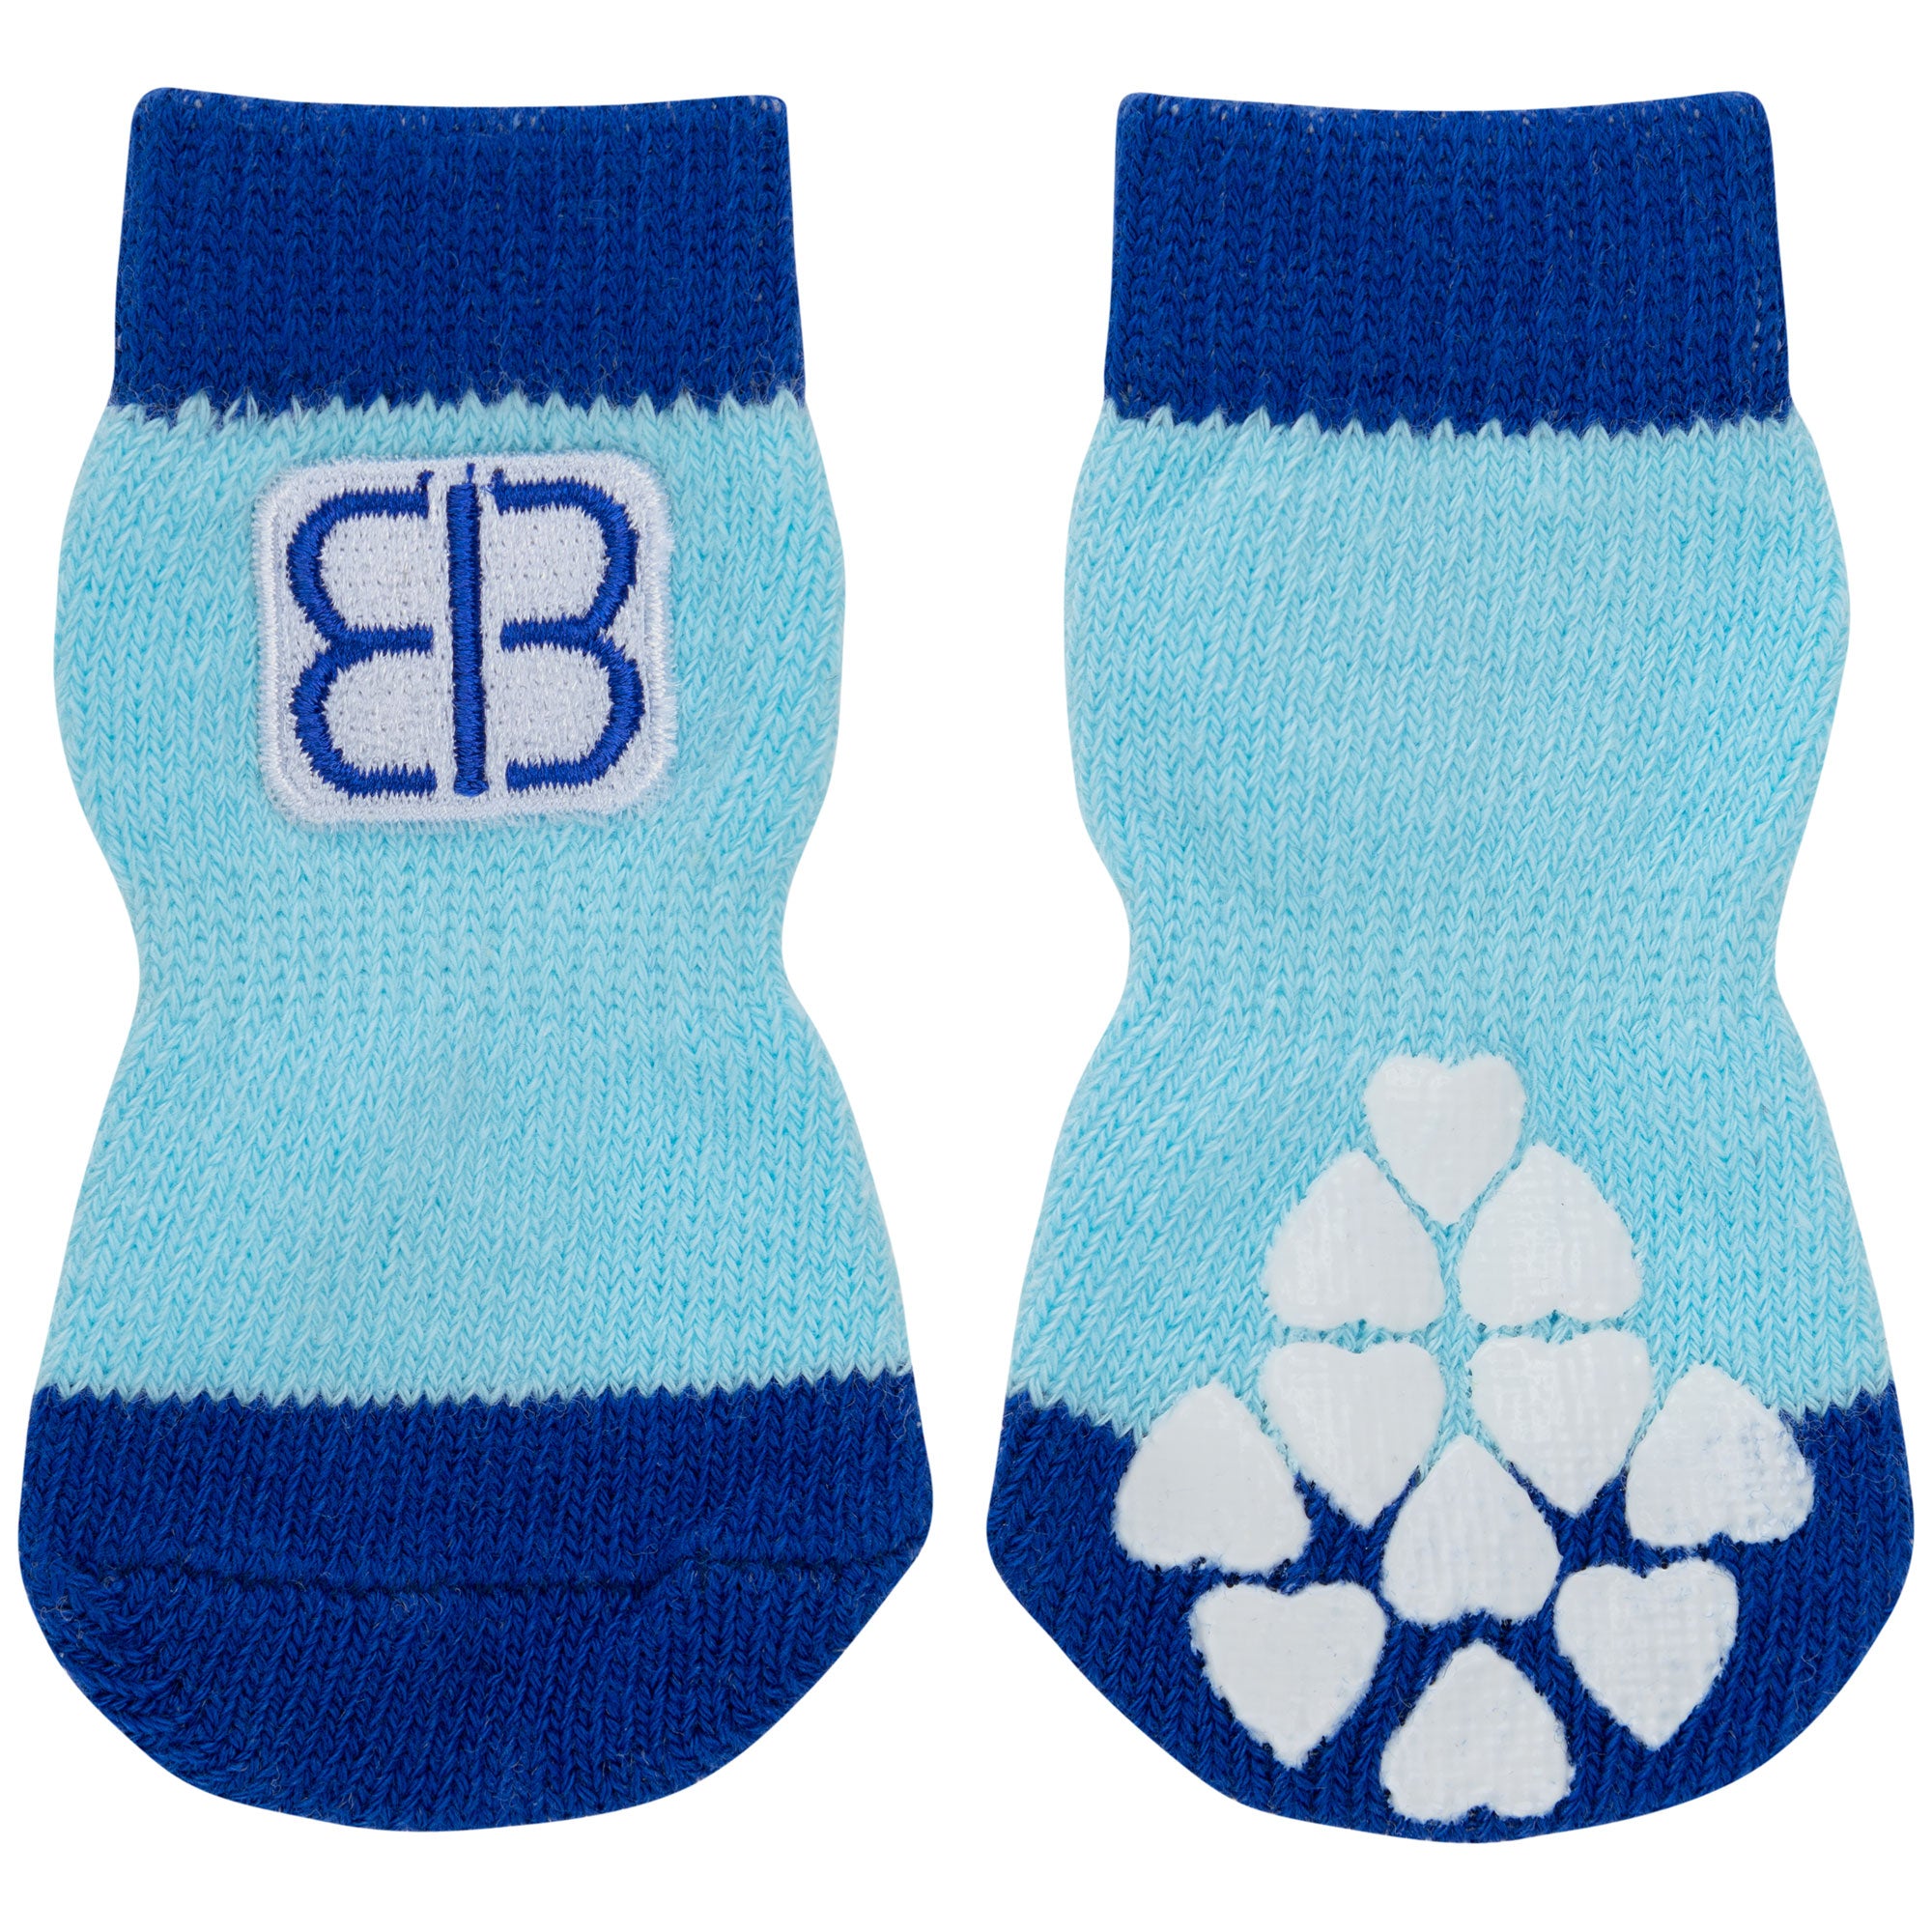 Traction Control Socks For Dogs - Blue/Light Blue - L